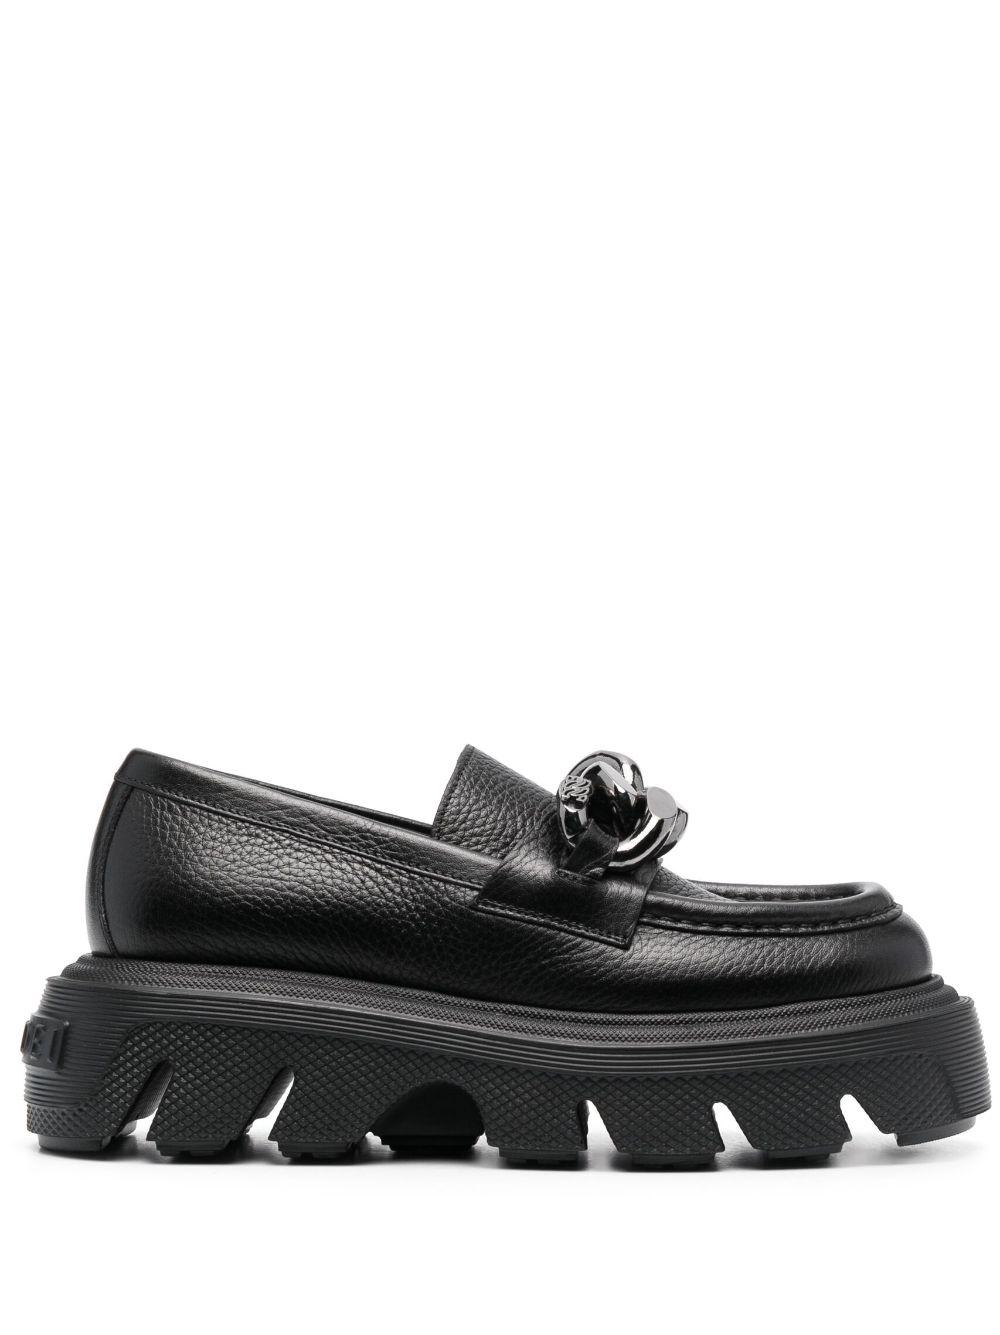 Casadei Generation C Leather Loafers in Black | Lyst